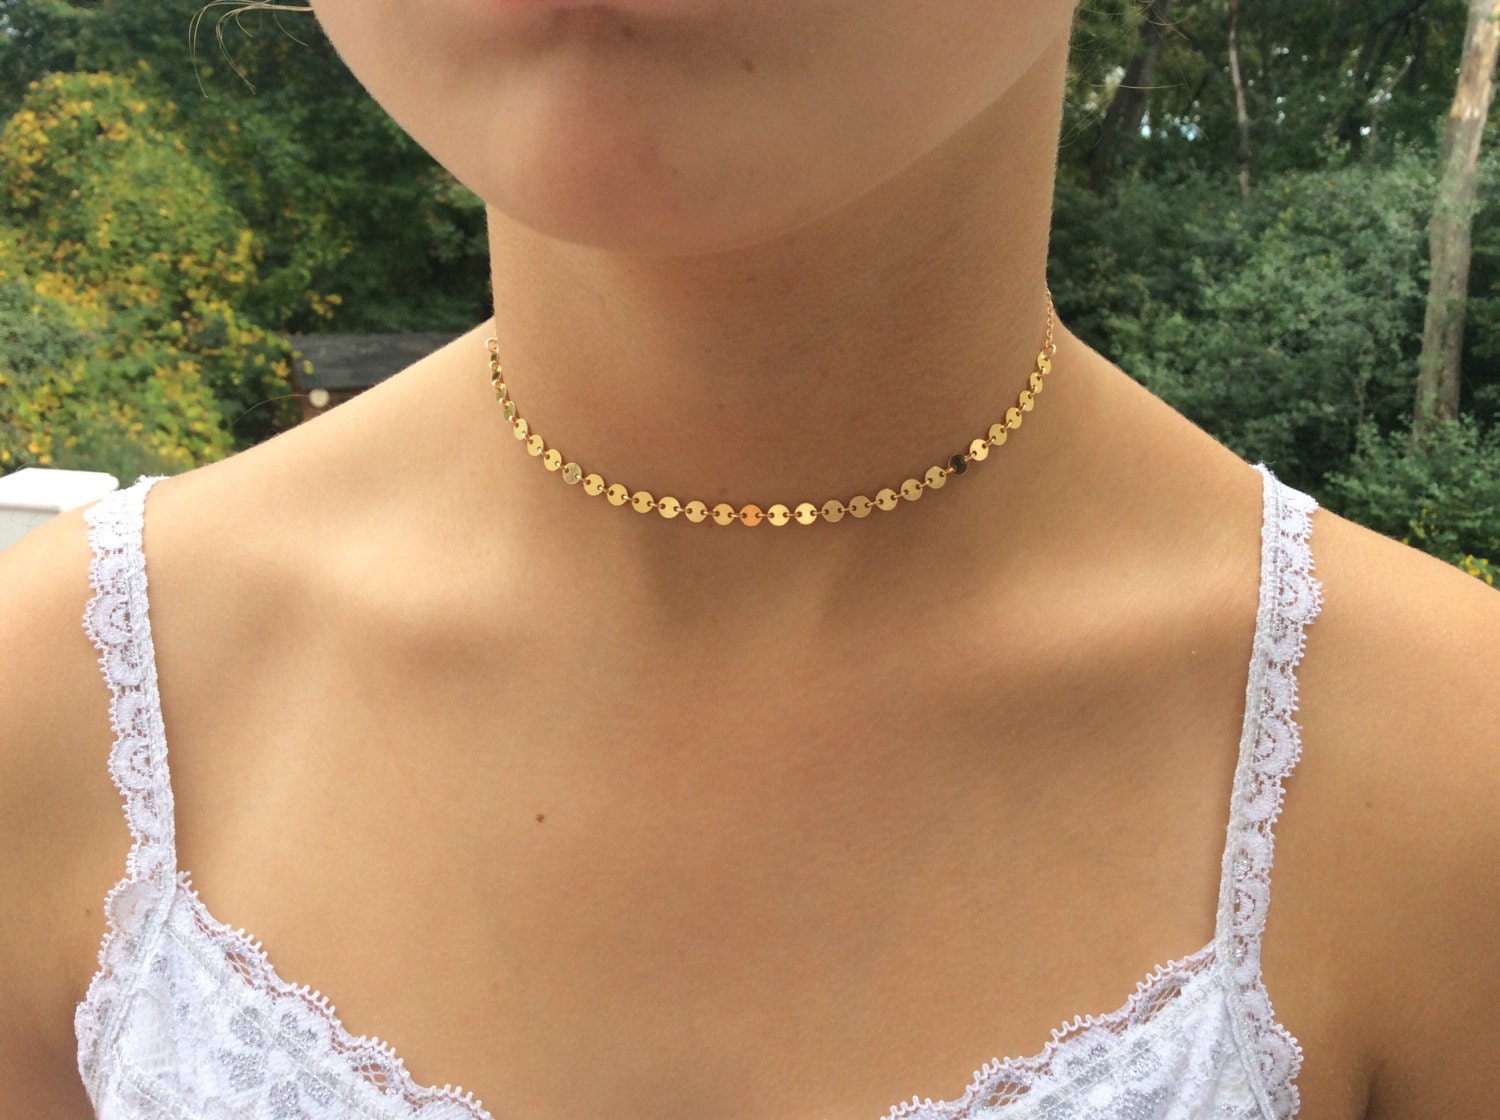 Gold choker, gold choker necklace, gold disc necklace, Dainty Gold Necklace Best Friend Gift Birthday Gift, girlfriend gift, bridesmaid gift